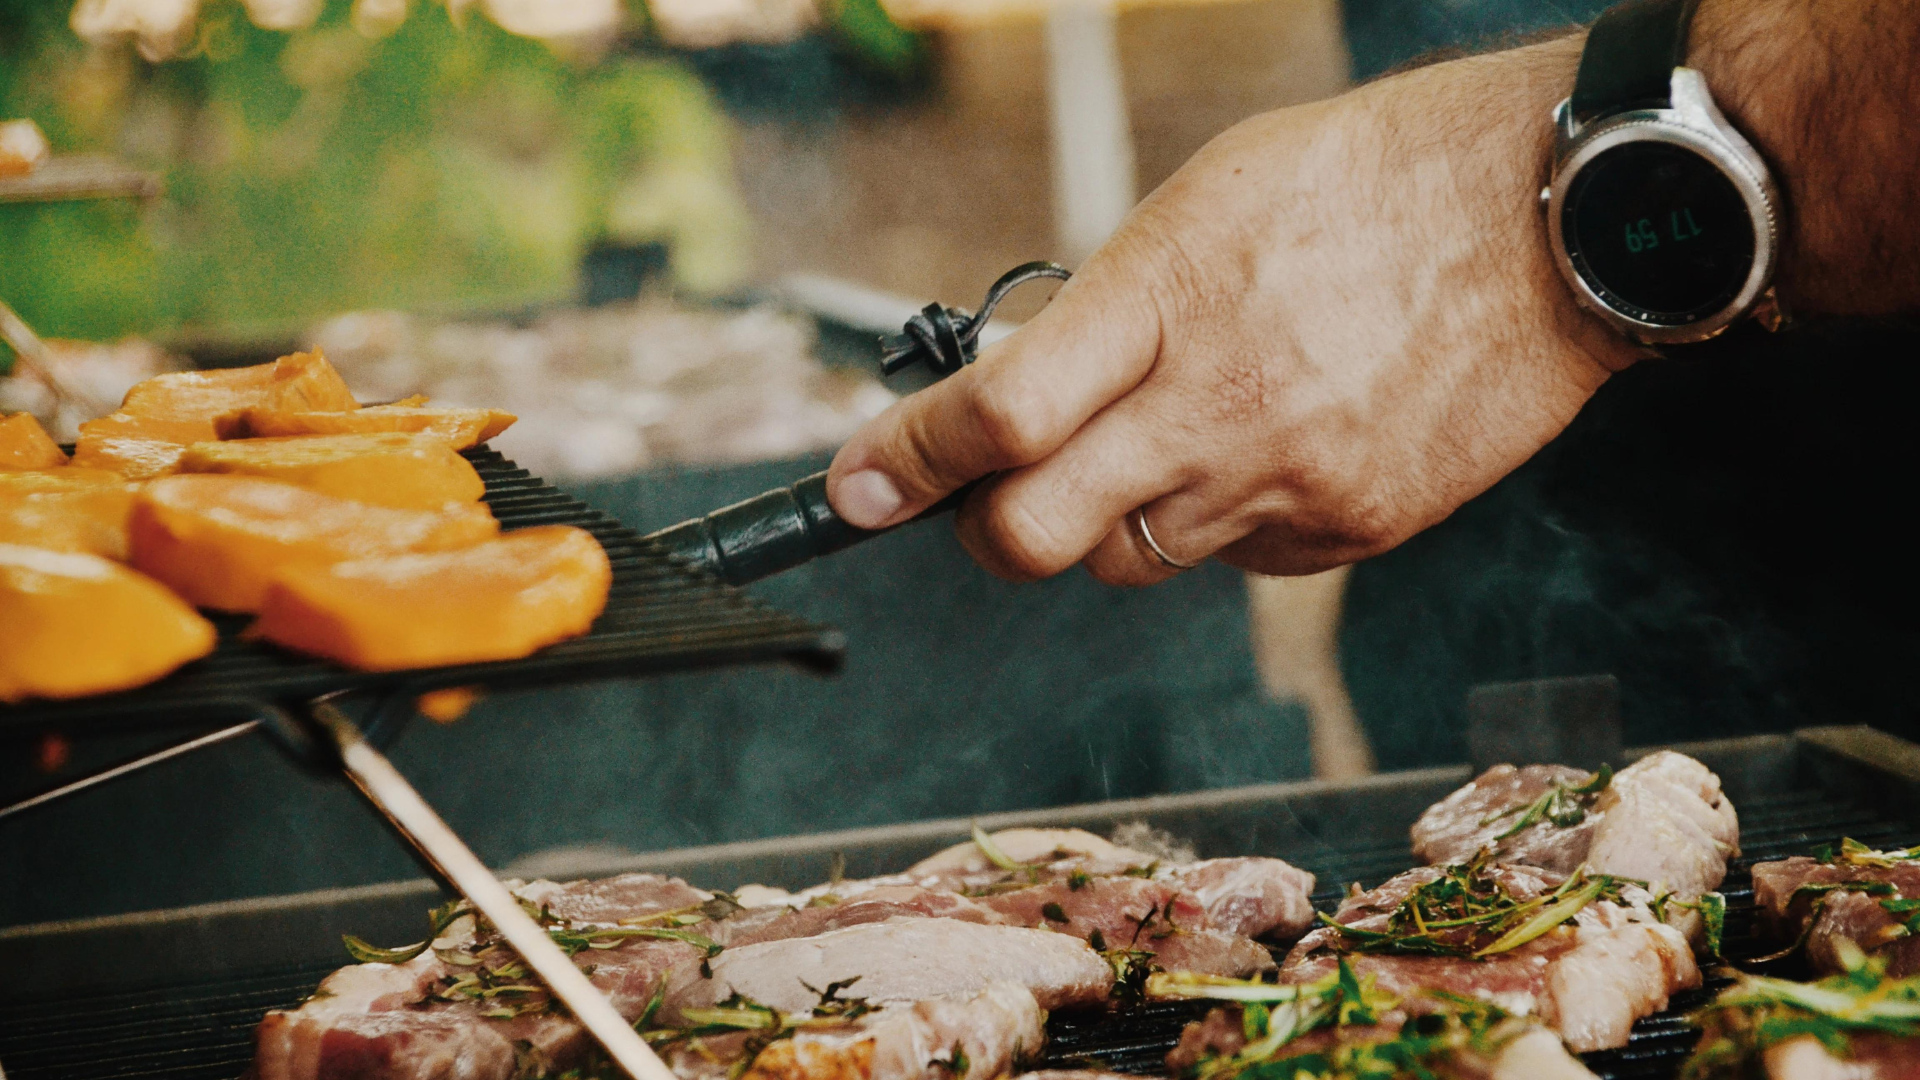 What Knives Do I Need For Summer BBQ?